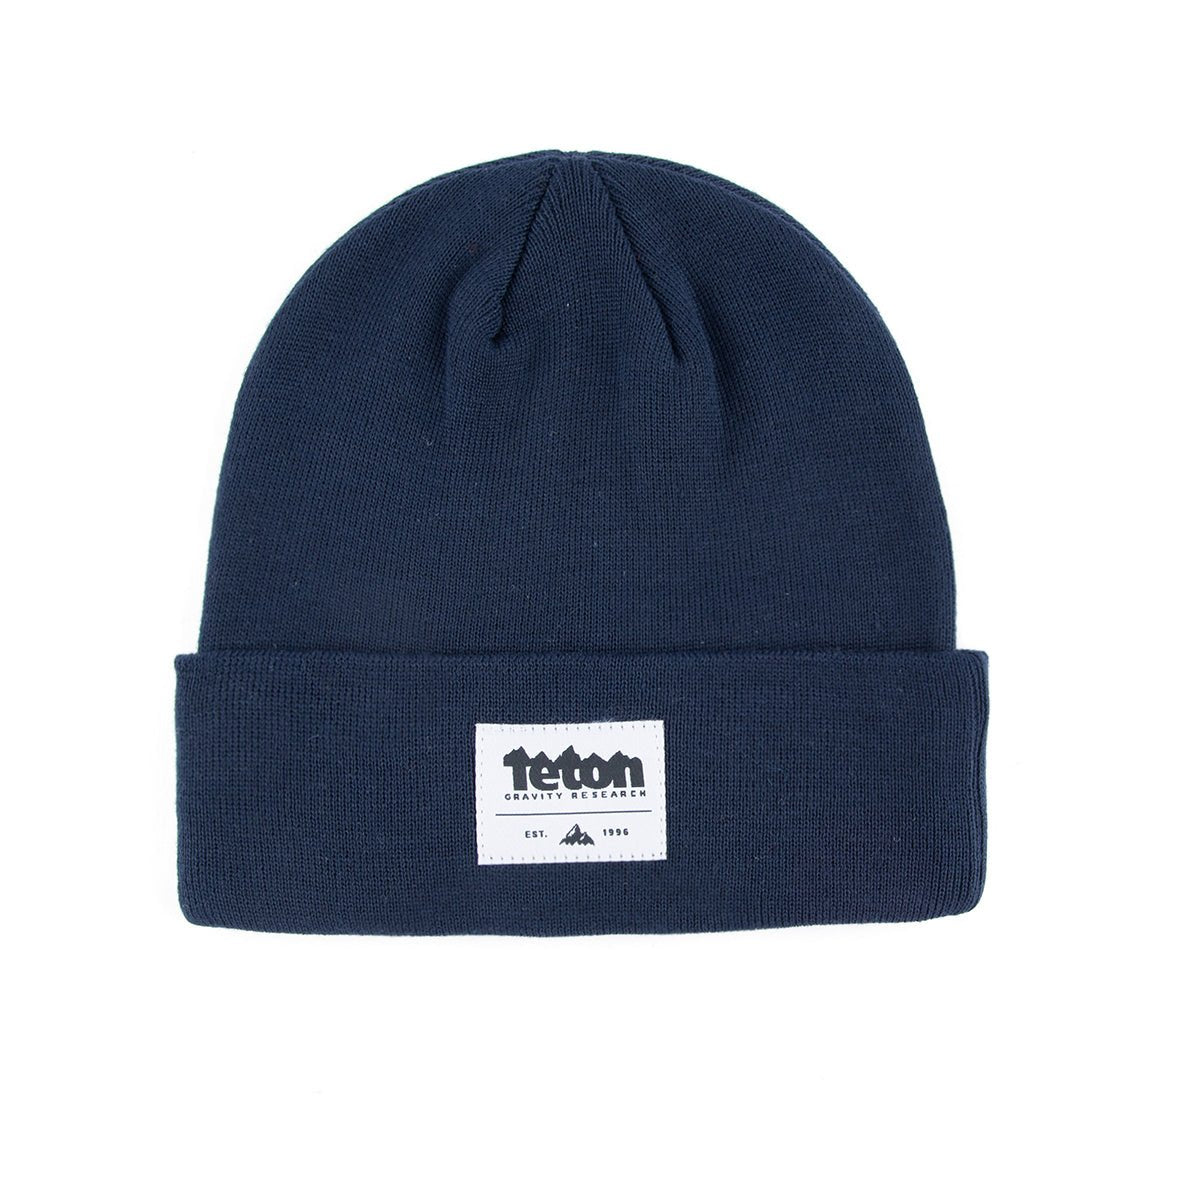 Recycled OG Beanie - Retail - Teton Gravity Research